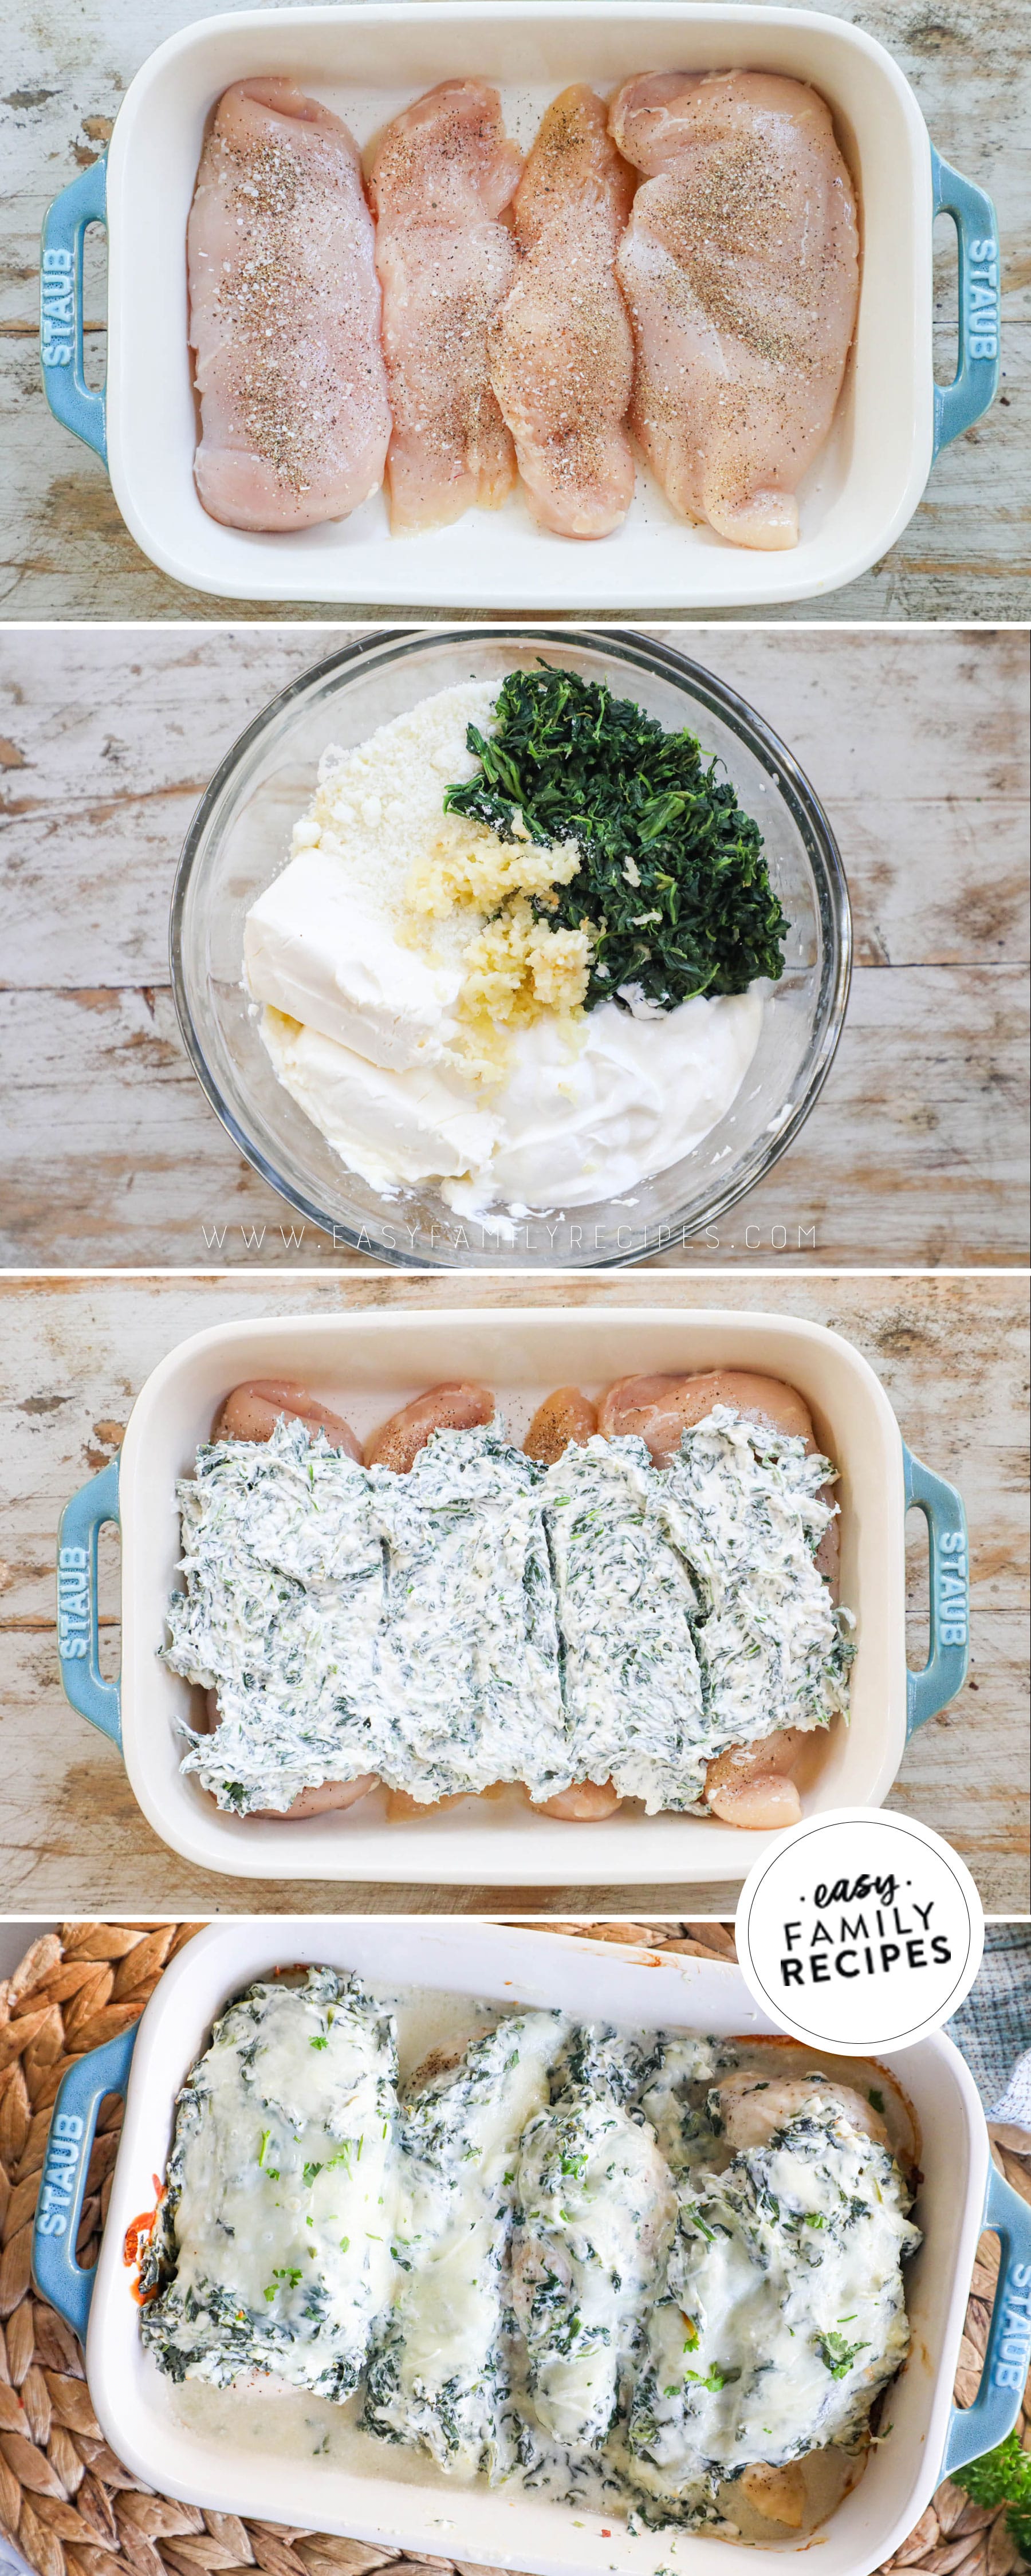 How to make creamy spinach chicken bake 1)season chicken 2)combine cheeses, sour cream, and spinach 3)spread over chicken 4)top with mozzarella and bake